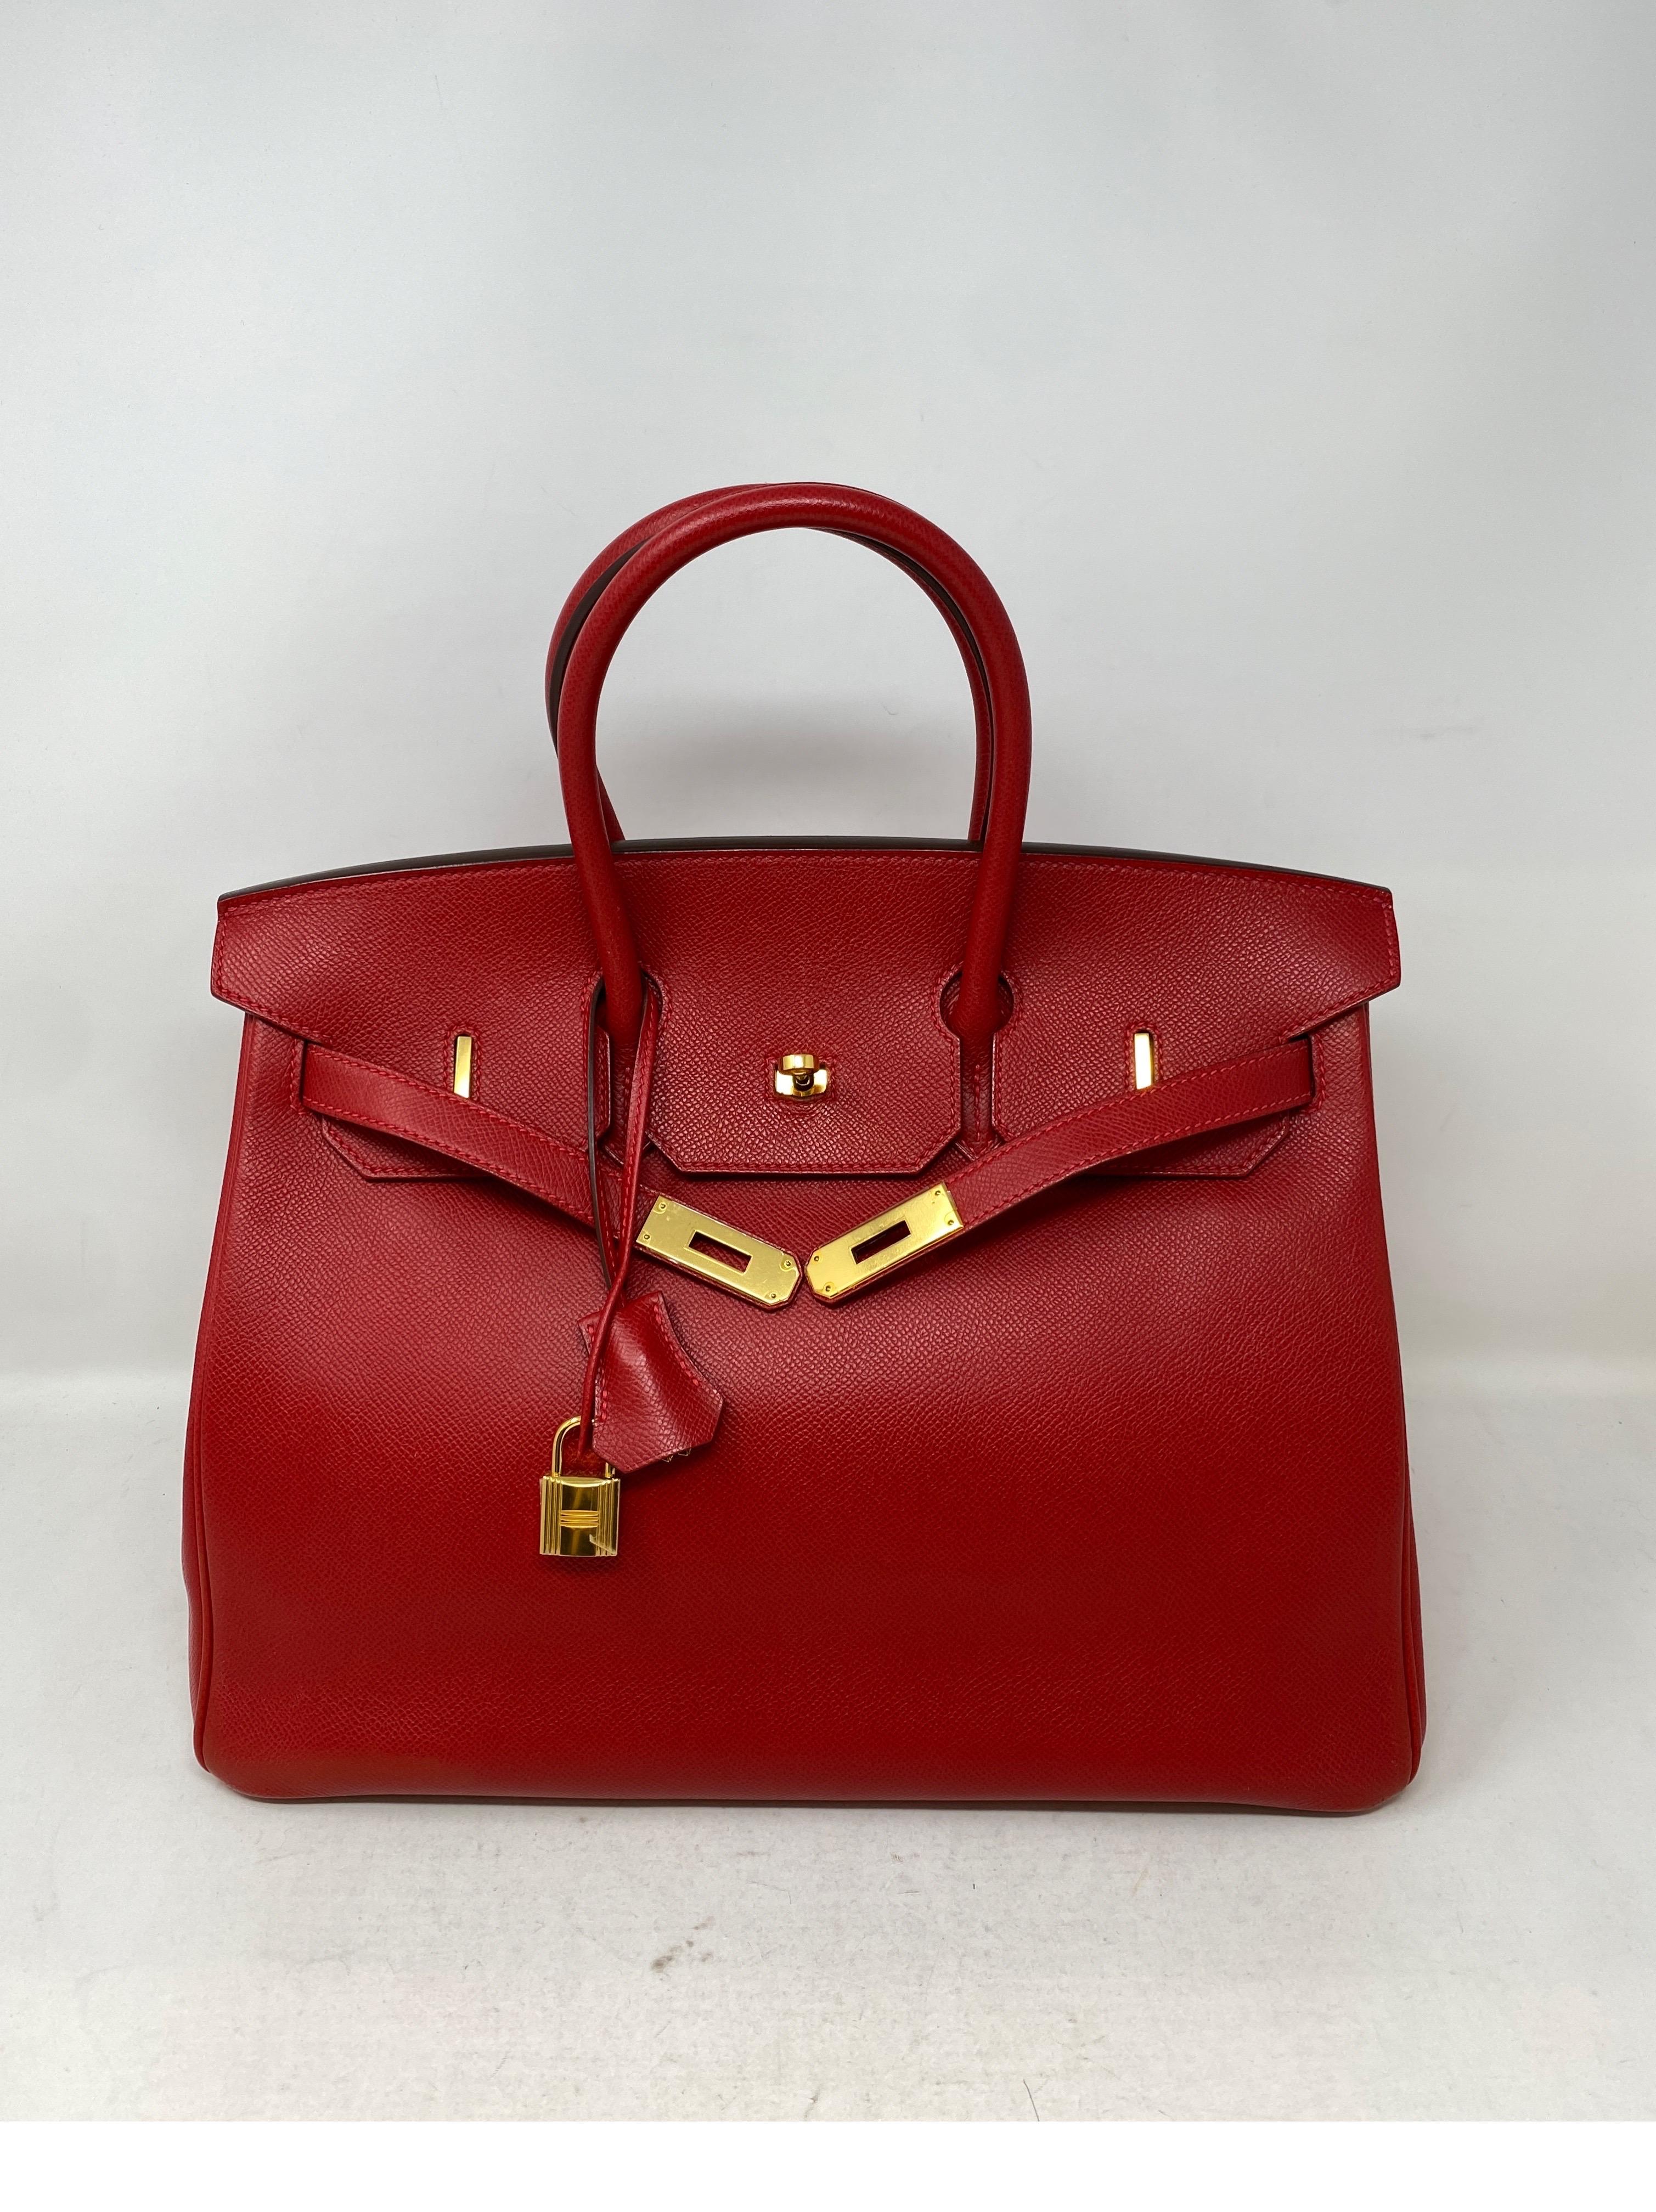 Hermes Rouge Casaque Birkin 35 Bag. Excellent condition. Beautiful most wanted red color. Gold hardware. Beautiful combination. Includes clochette, lock, keys, and dust cover. Guaranteed authentic. 